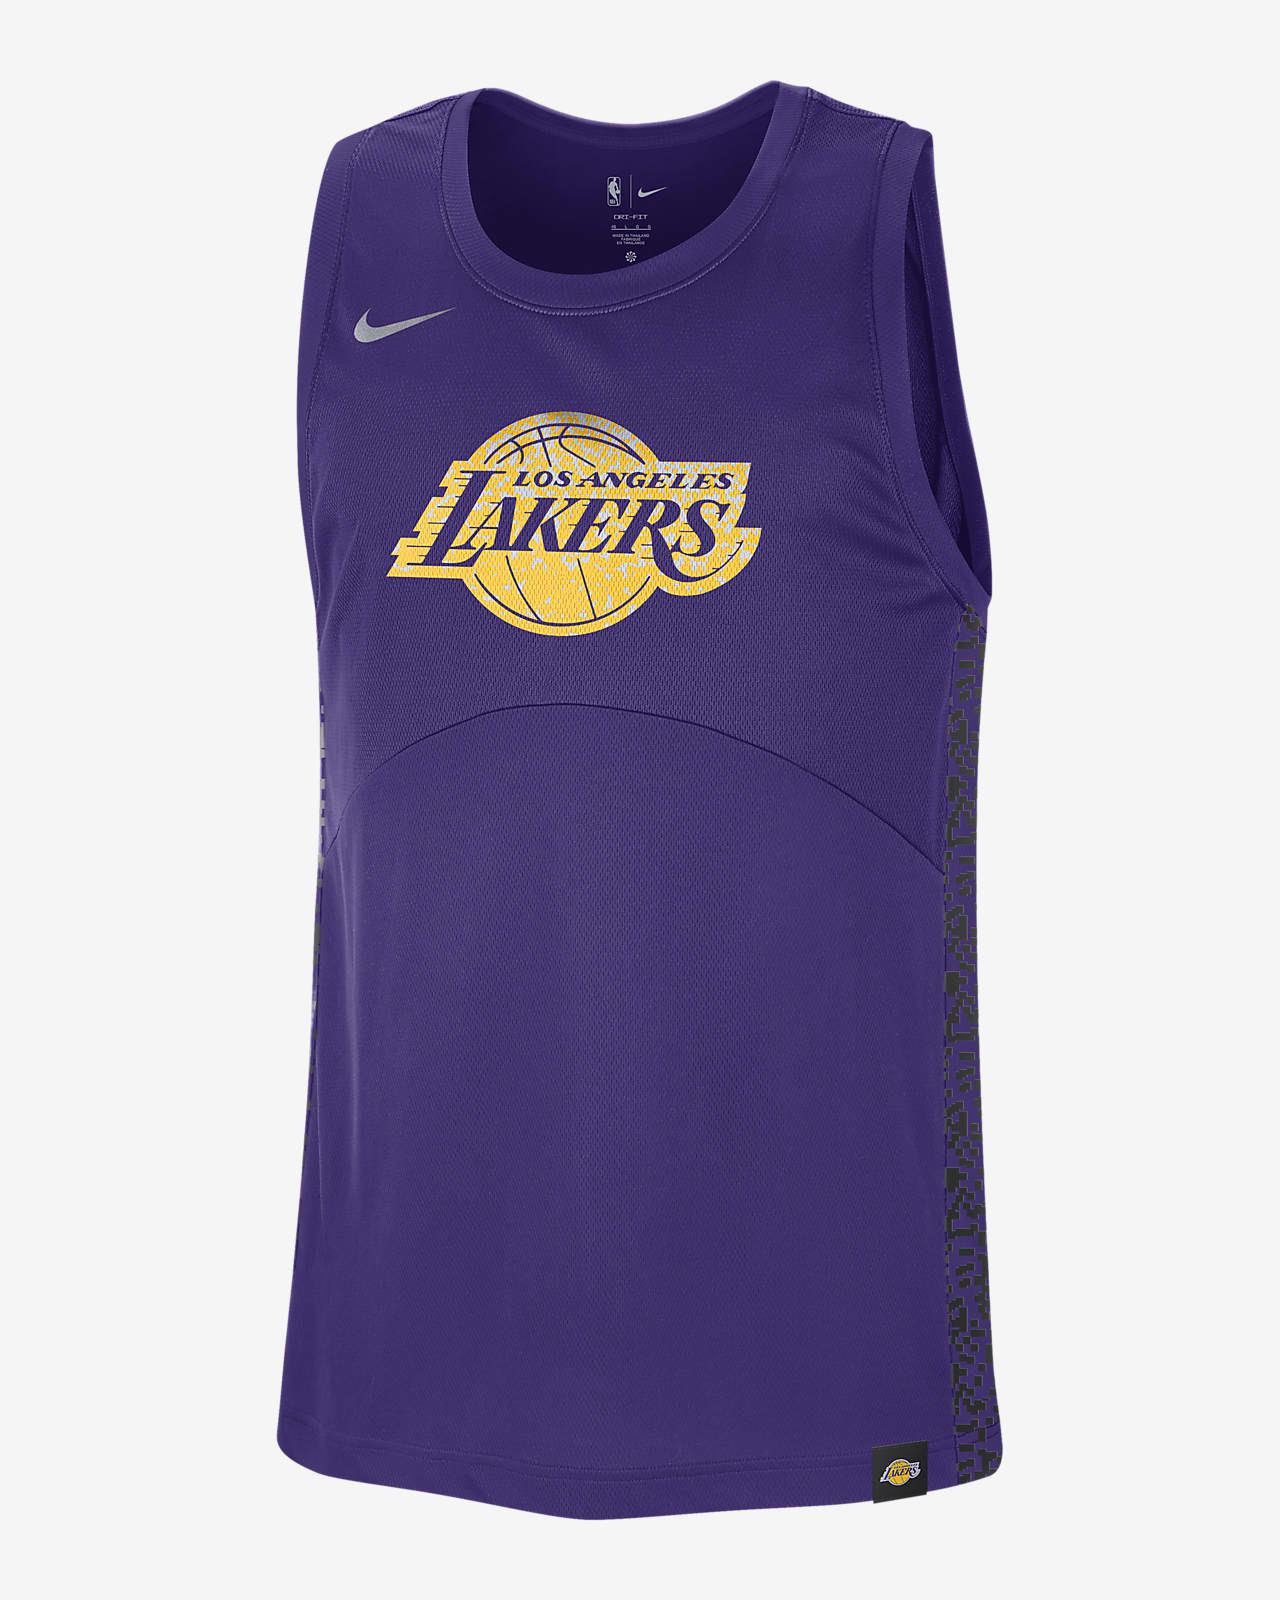 Los Angeles Lakers Starting 5 Courtside Men's Nike Dri-FIT NBA Graphic Jersey